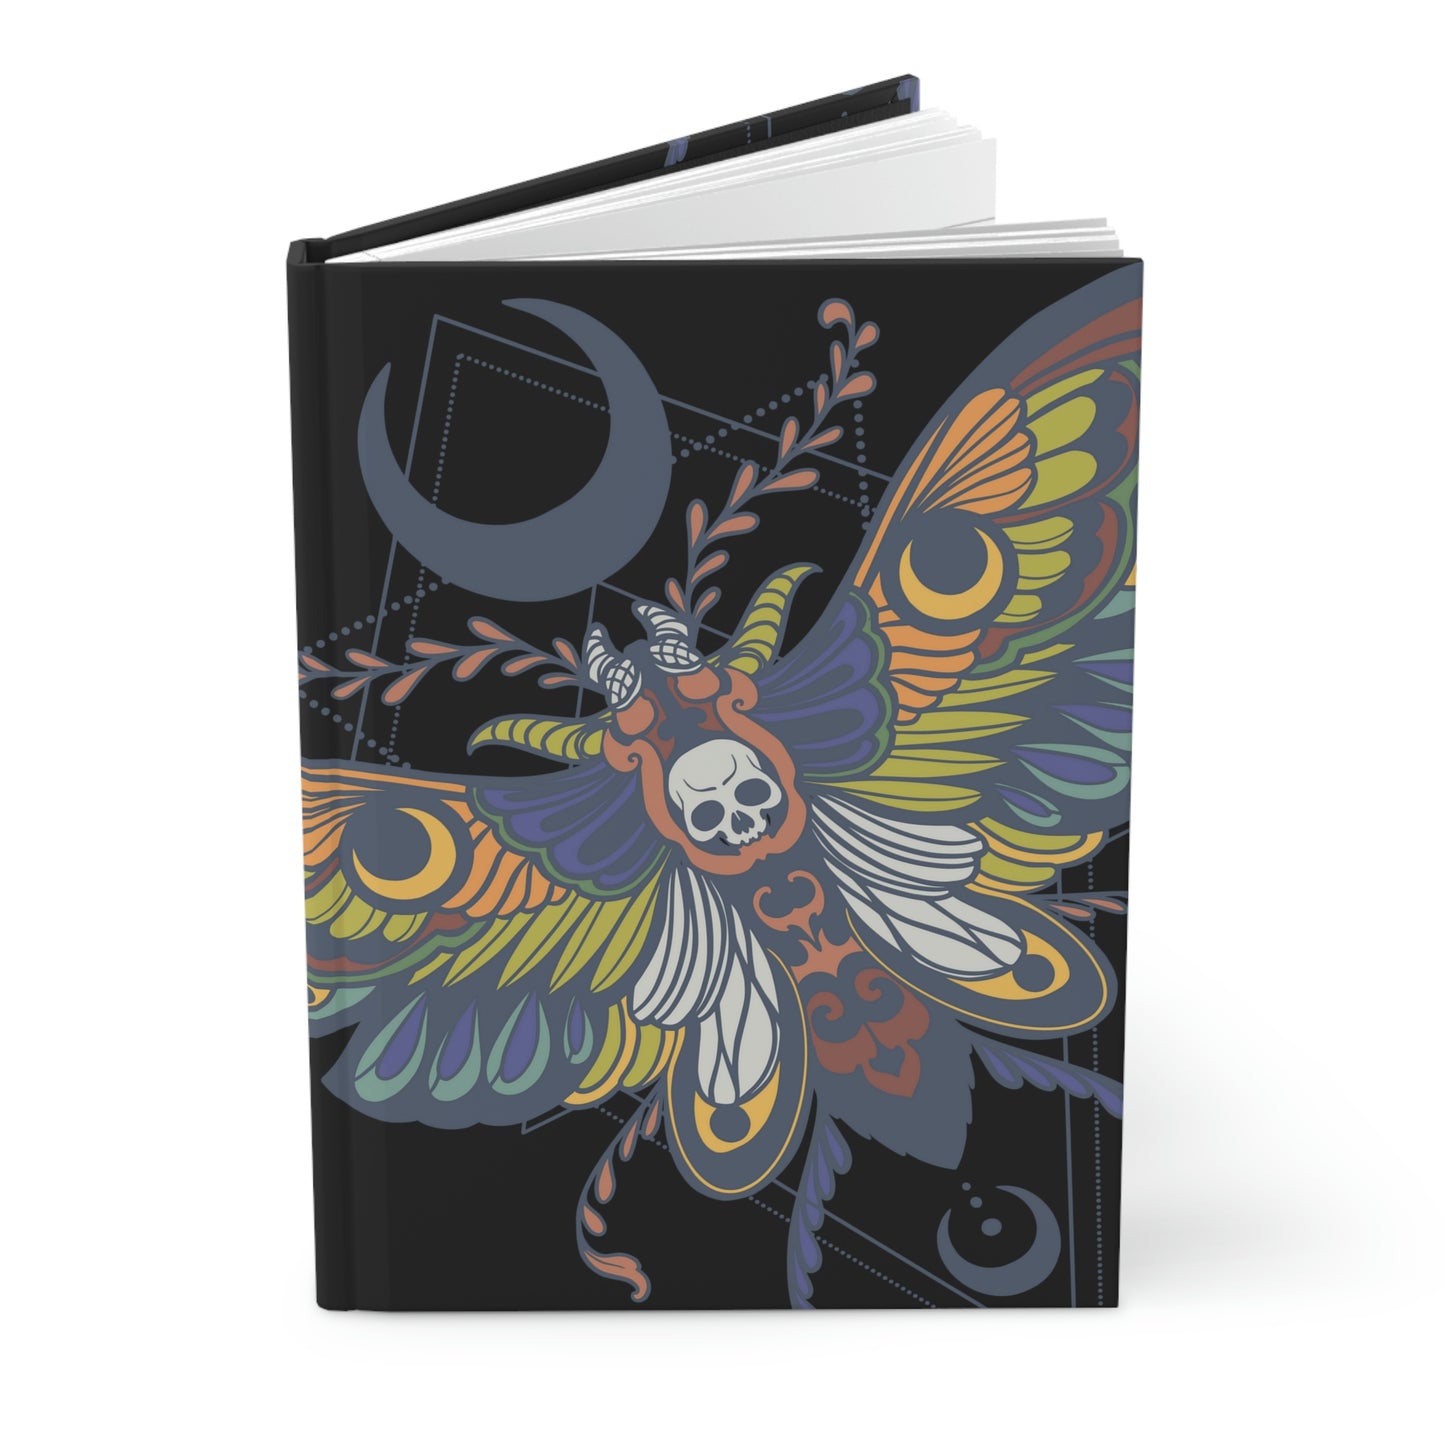 Book of Shadows - Death Moth - Hardcover Grimoire for Witches, Pagans, Wiccans - 150 lined page notebook